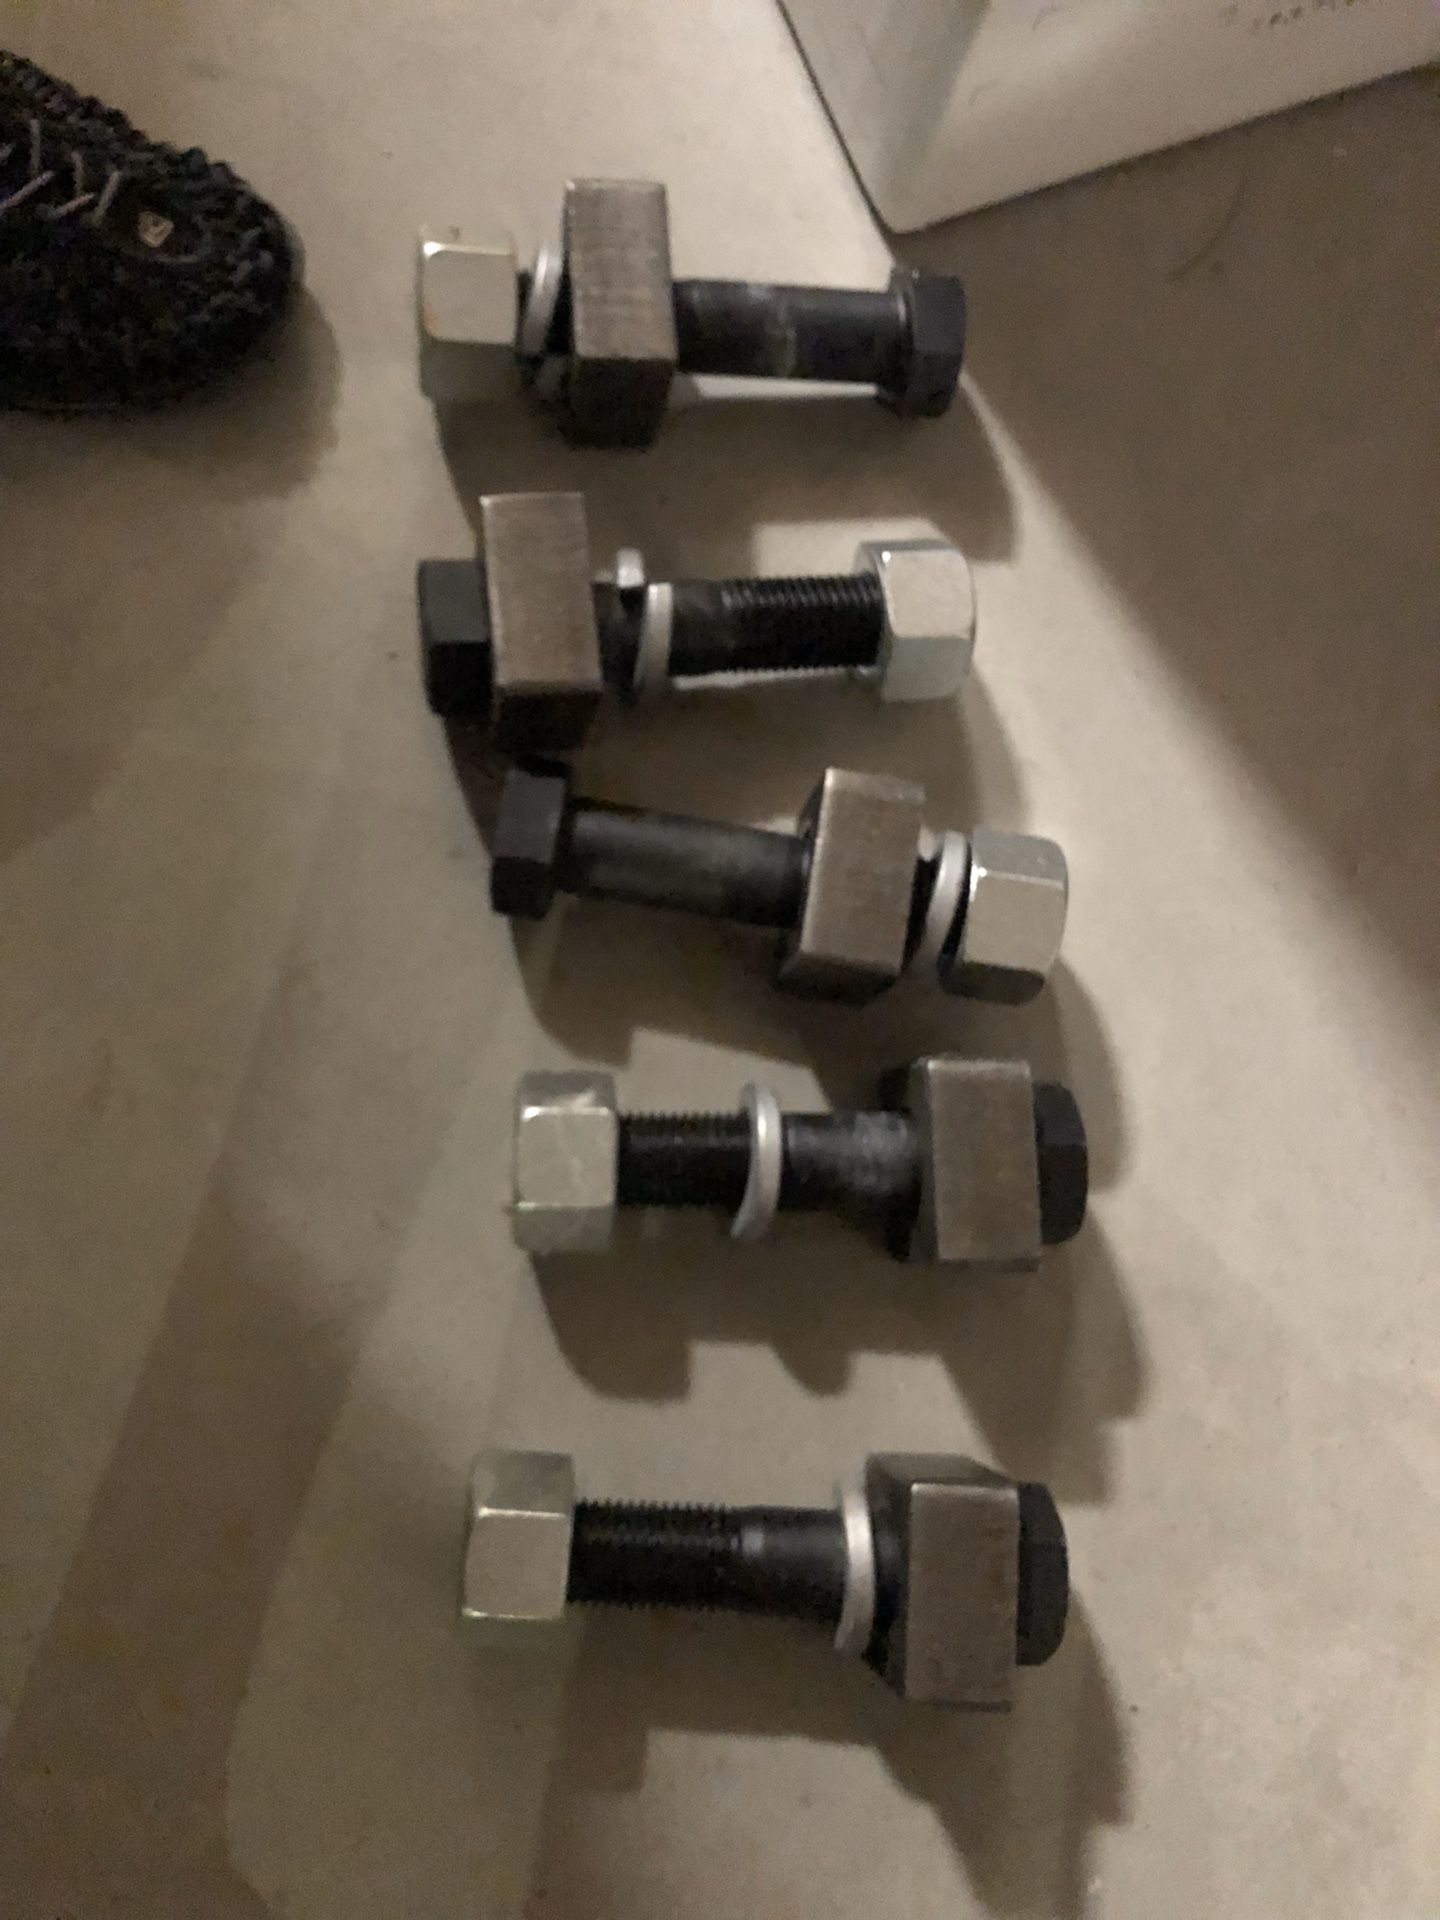 Large bolts